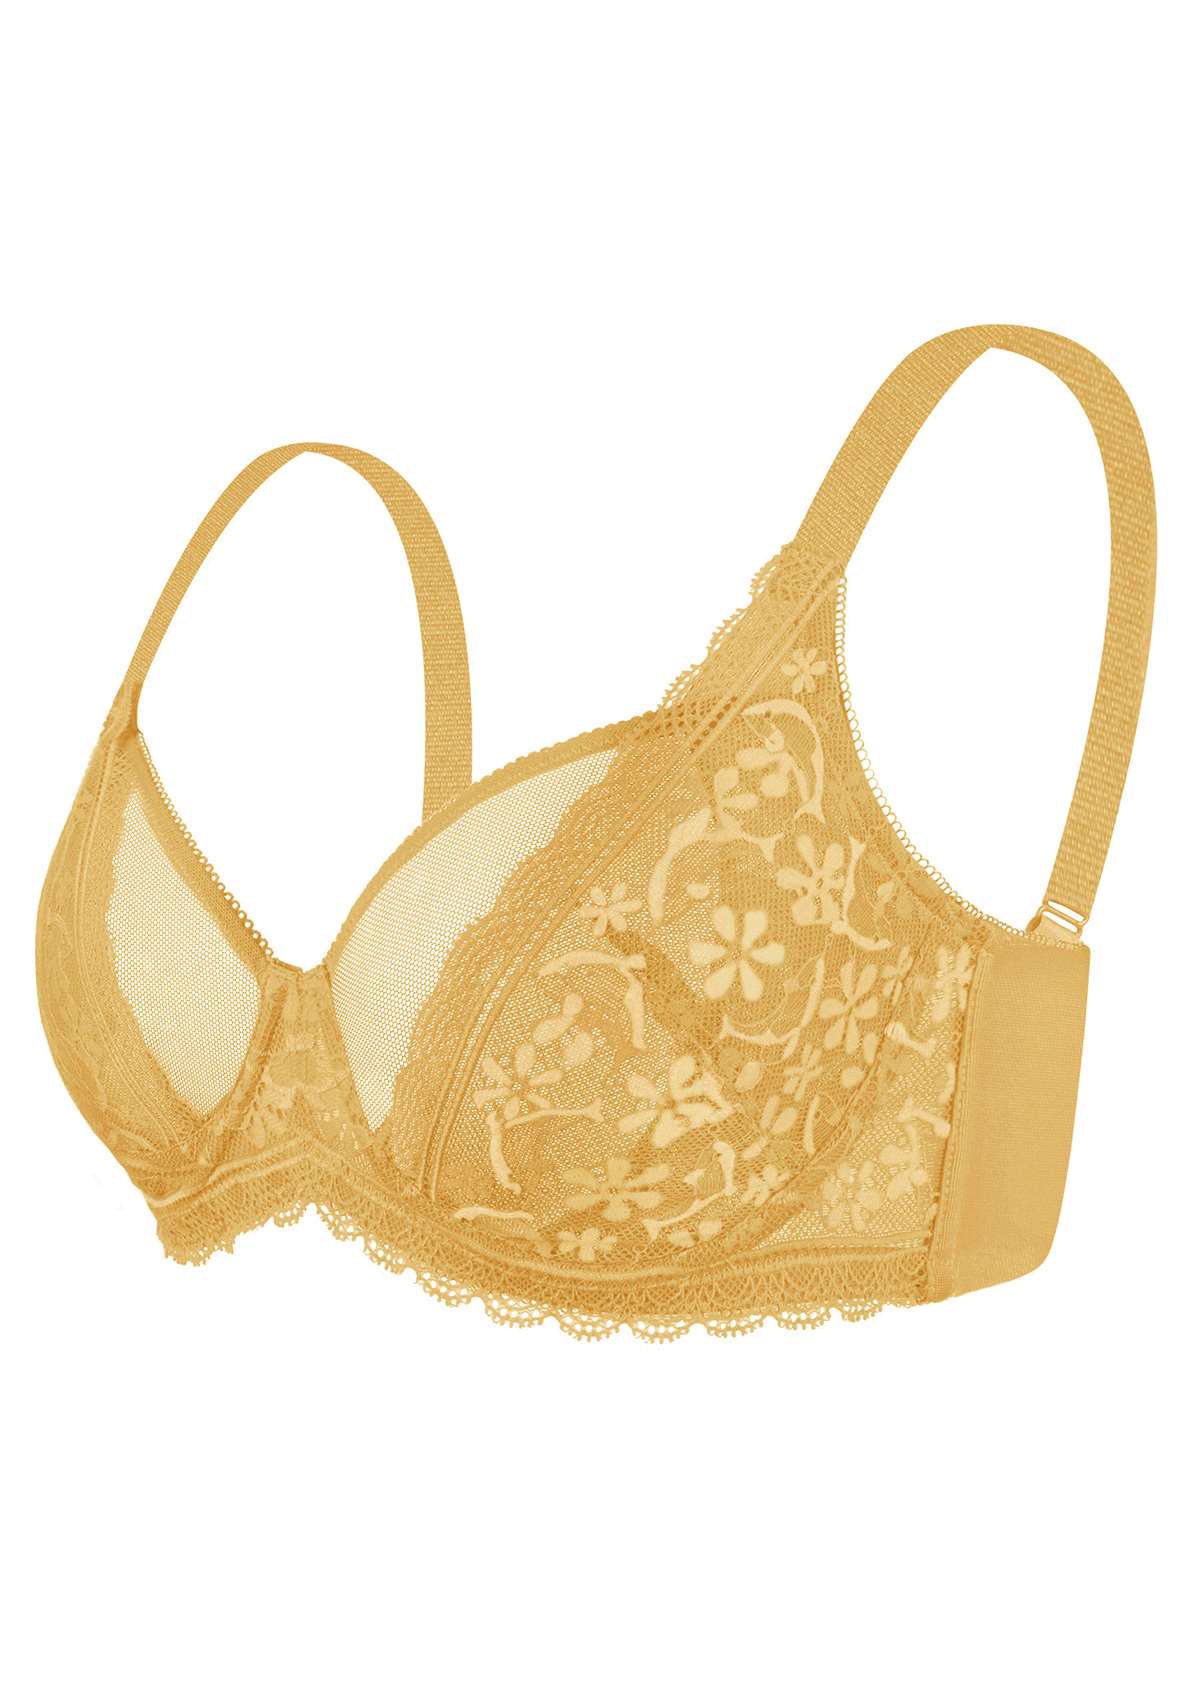 HSIA Anemone Lace Unlined Bra: Supportive, Lightweight Bra - Champagne / 34 / C